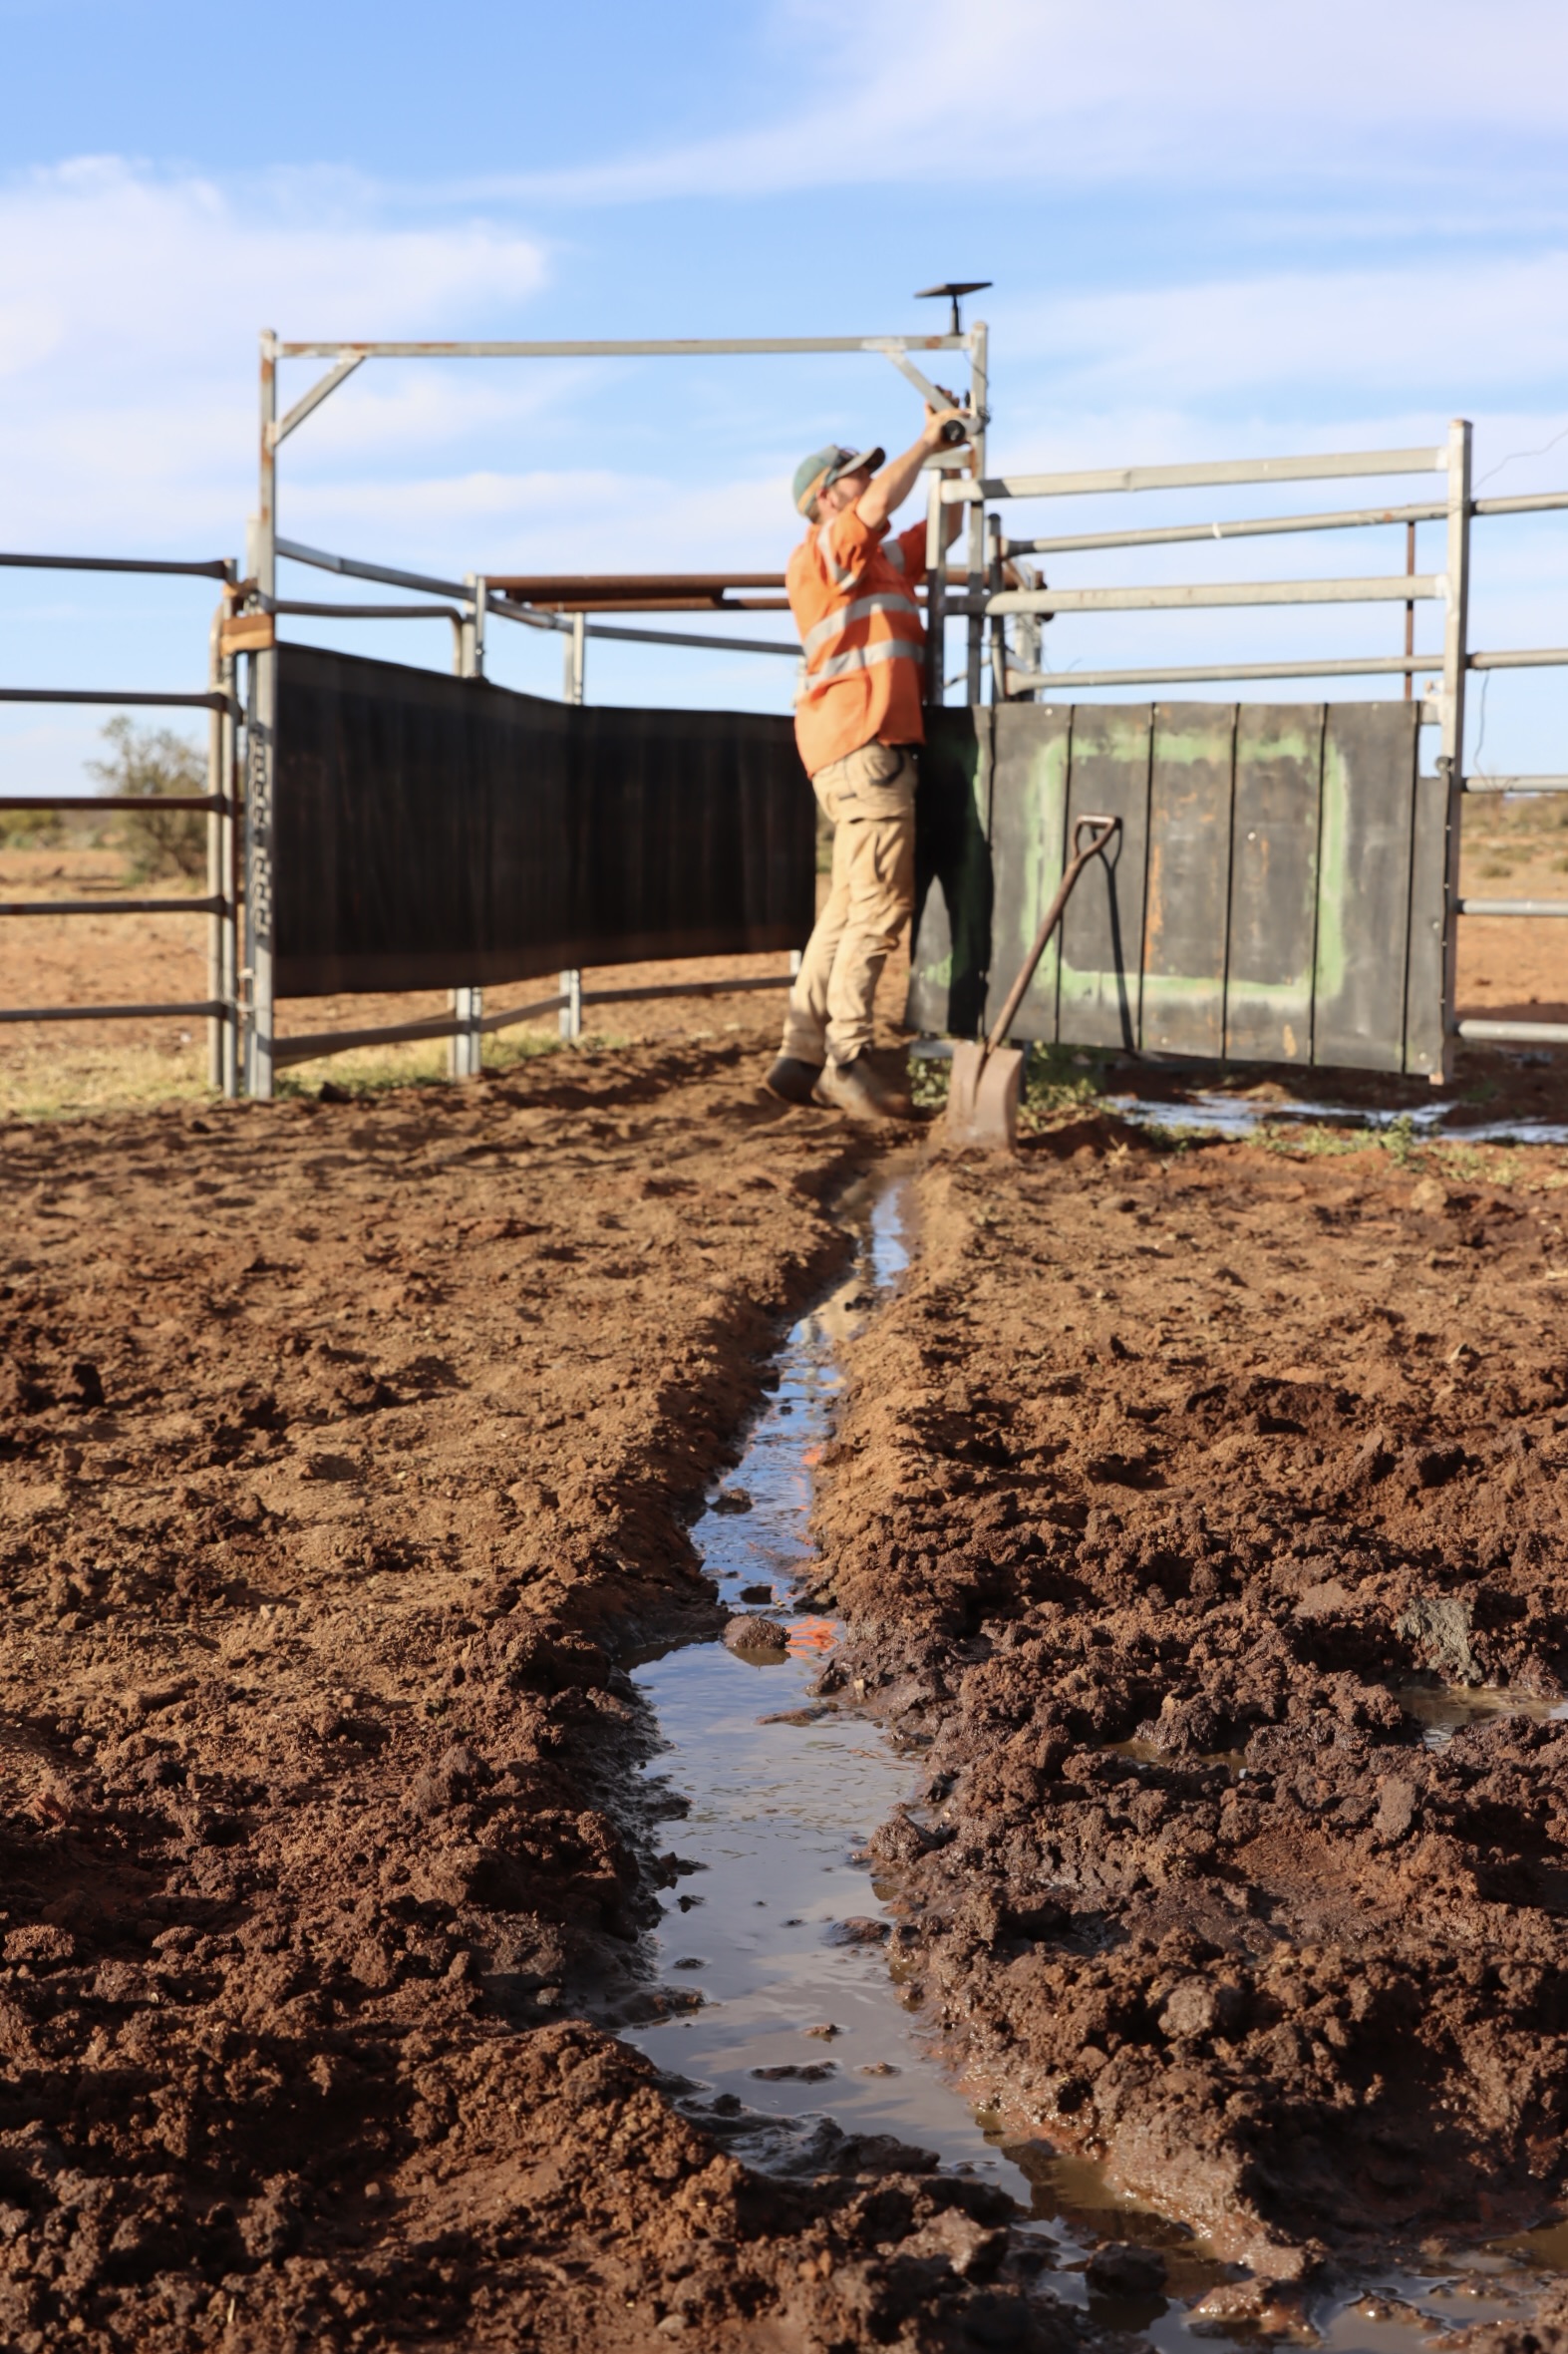 A man checking a camera in a cattle yard.